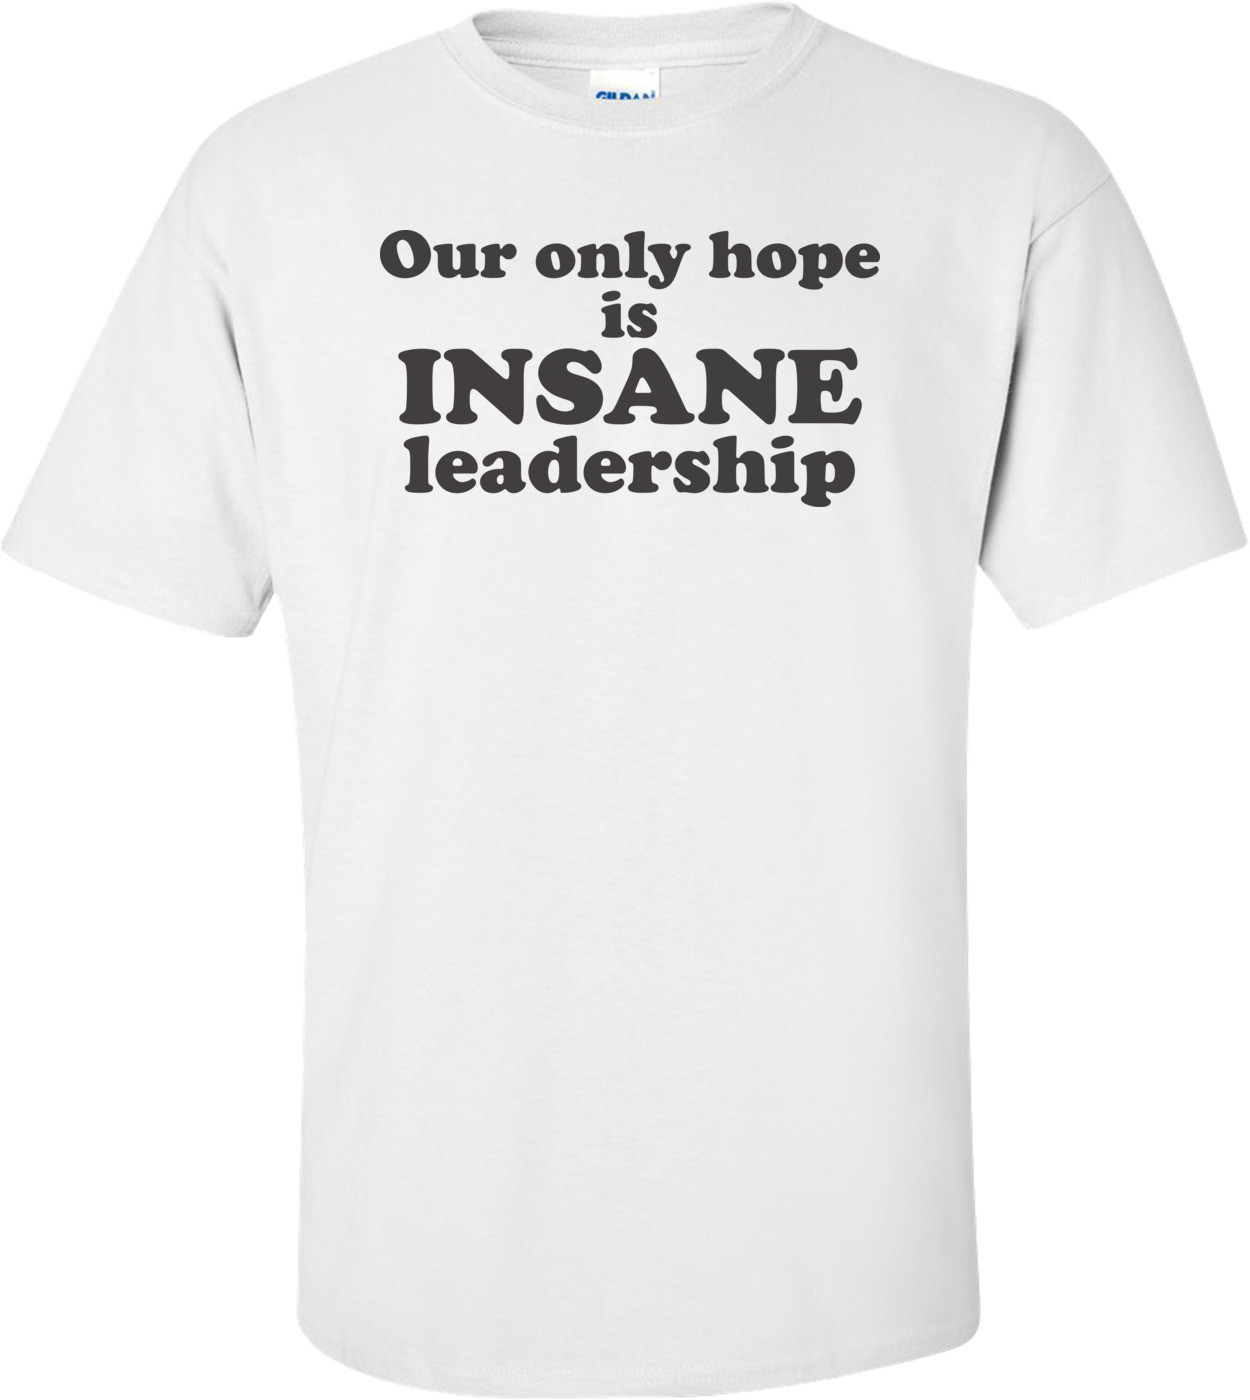 Our Only Hope Is Insane Leadership T-shirt